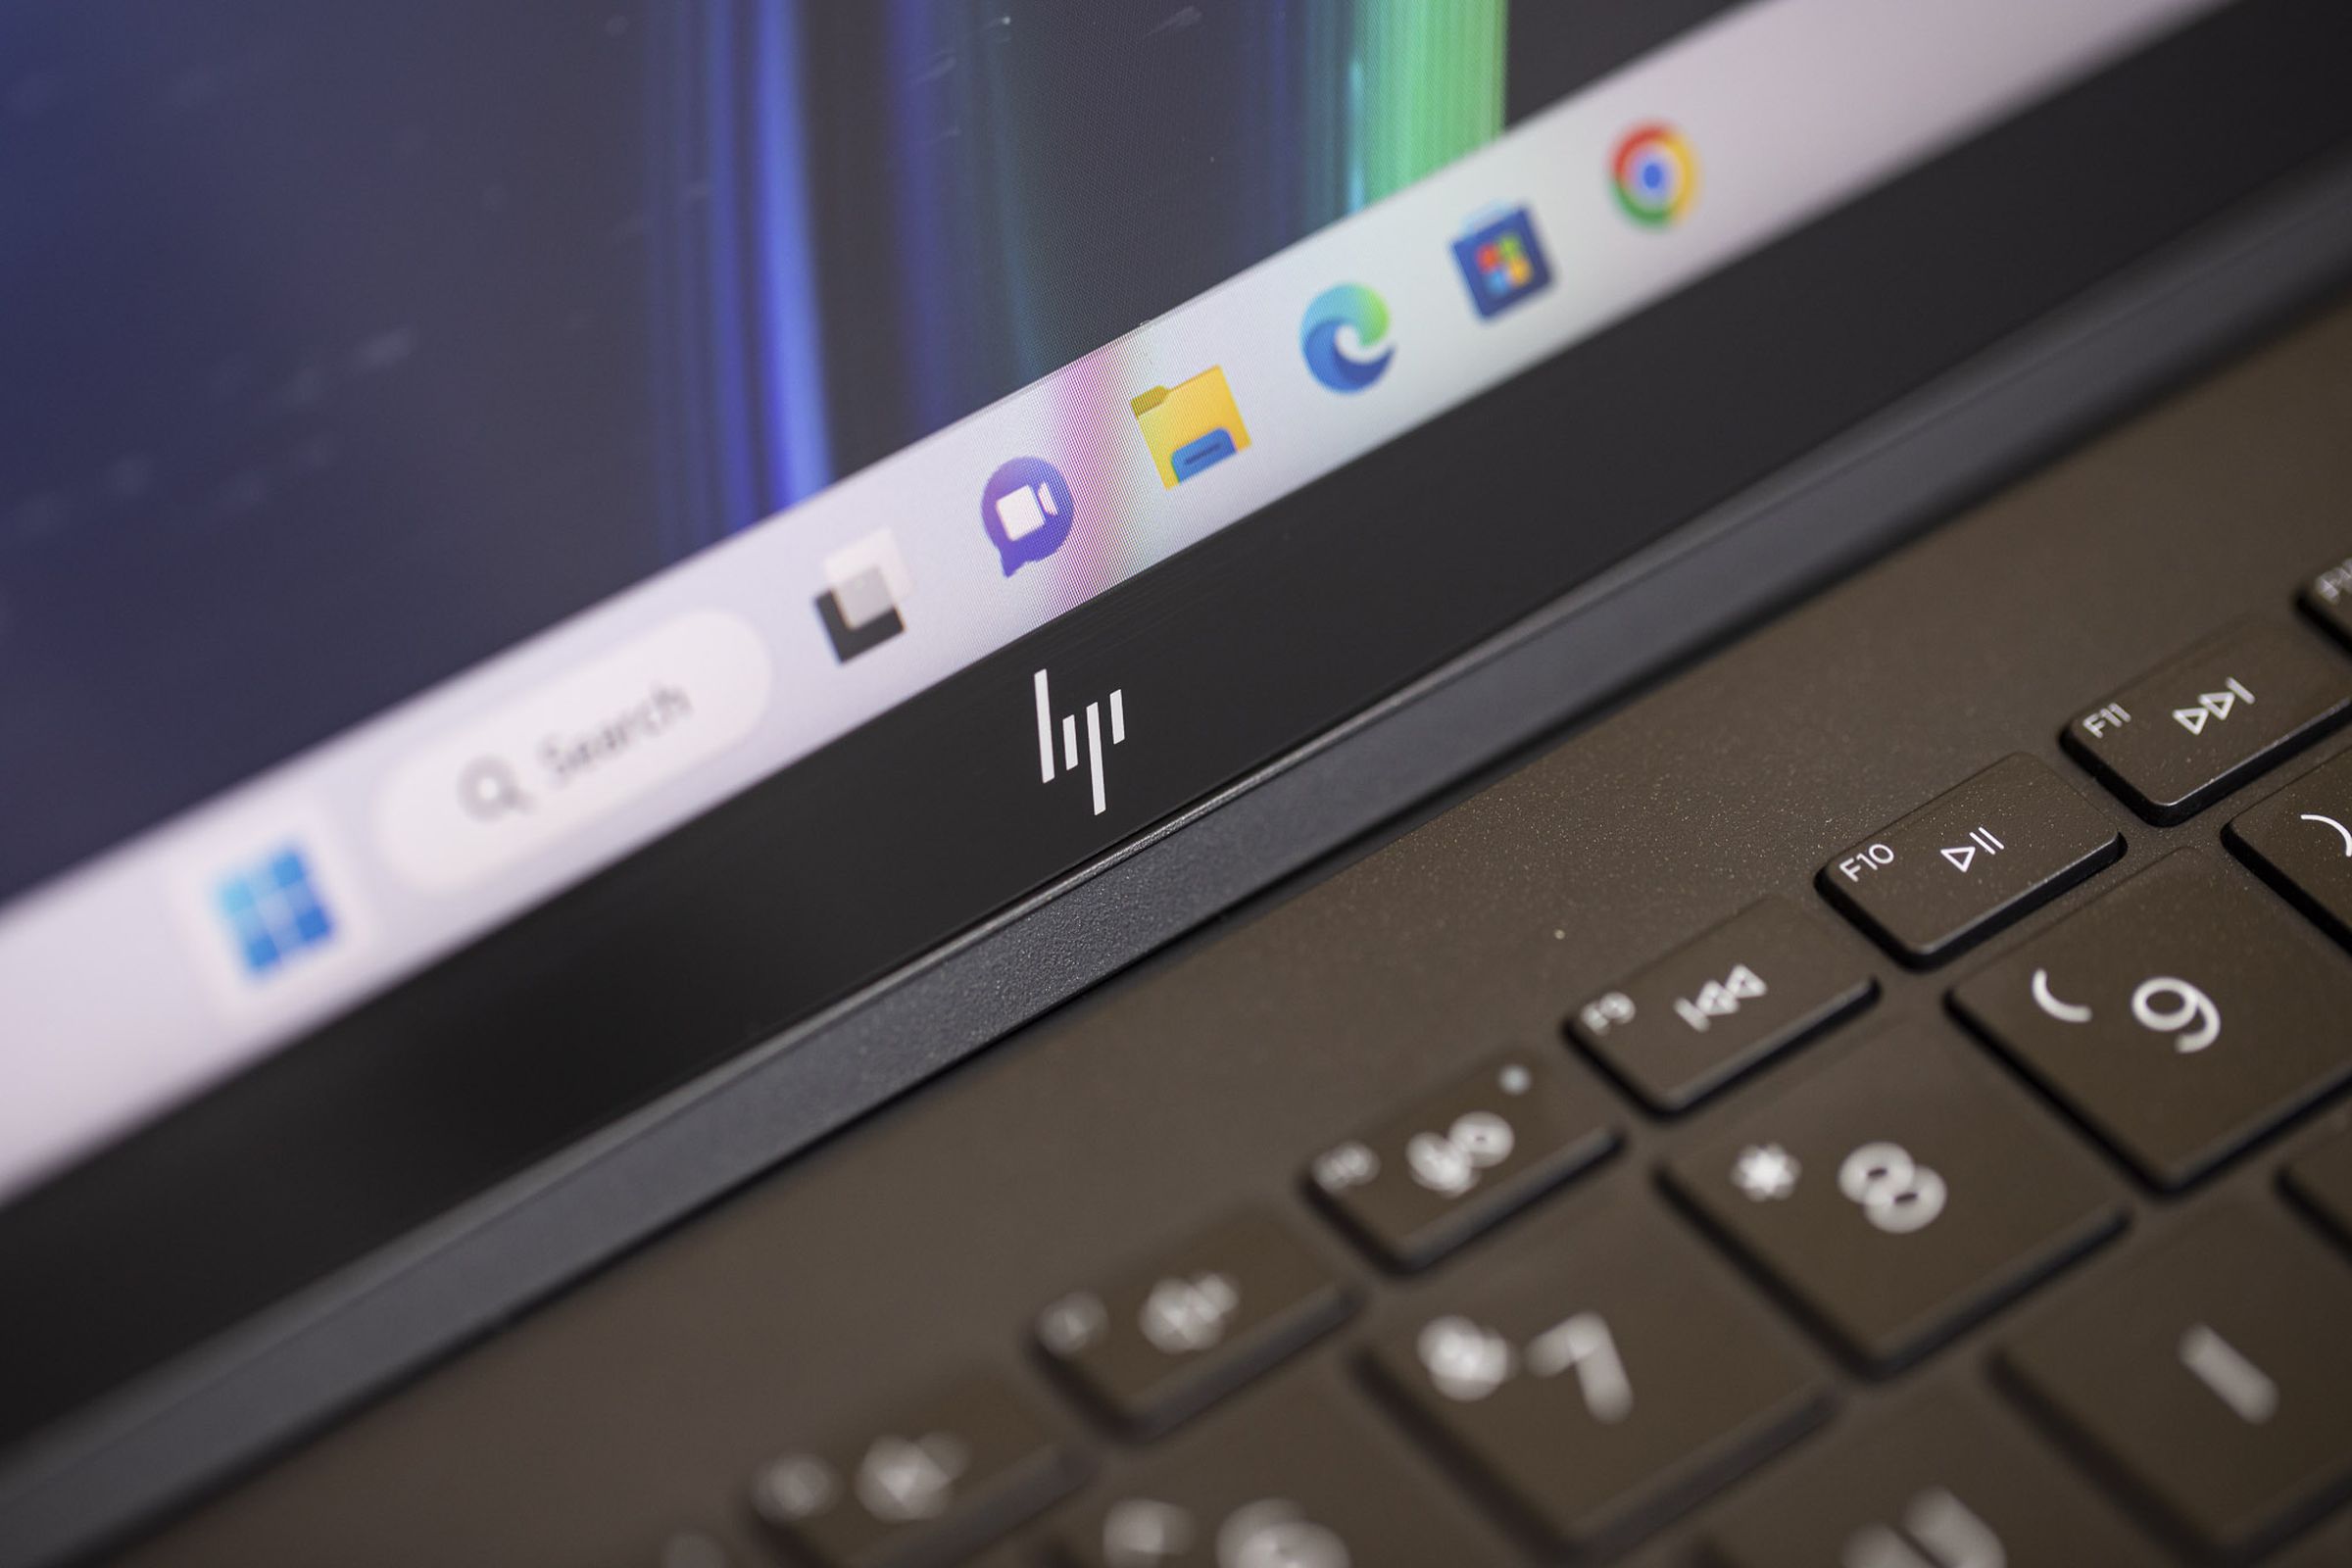 The HP logo on the HP Dragonfly pro.